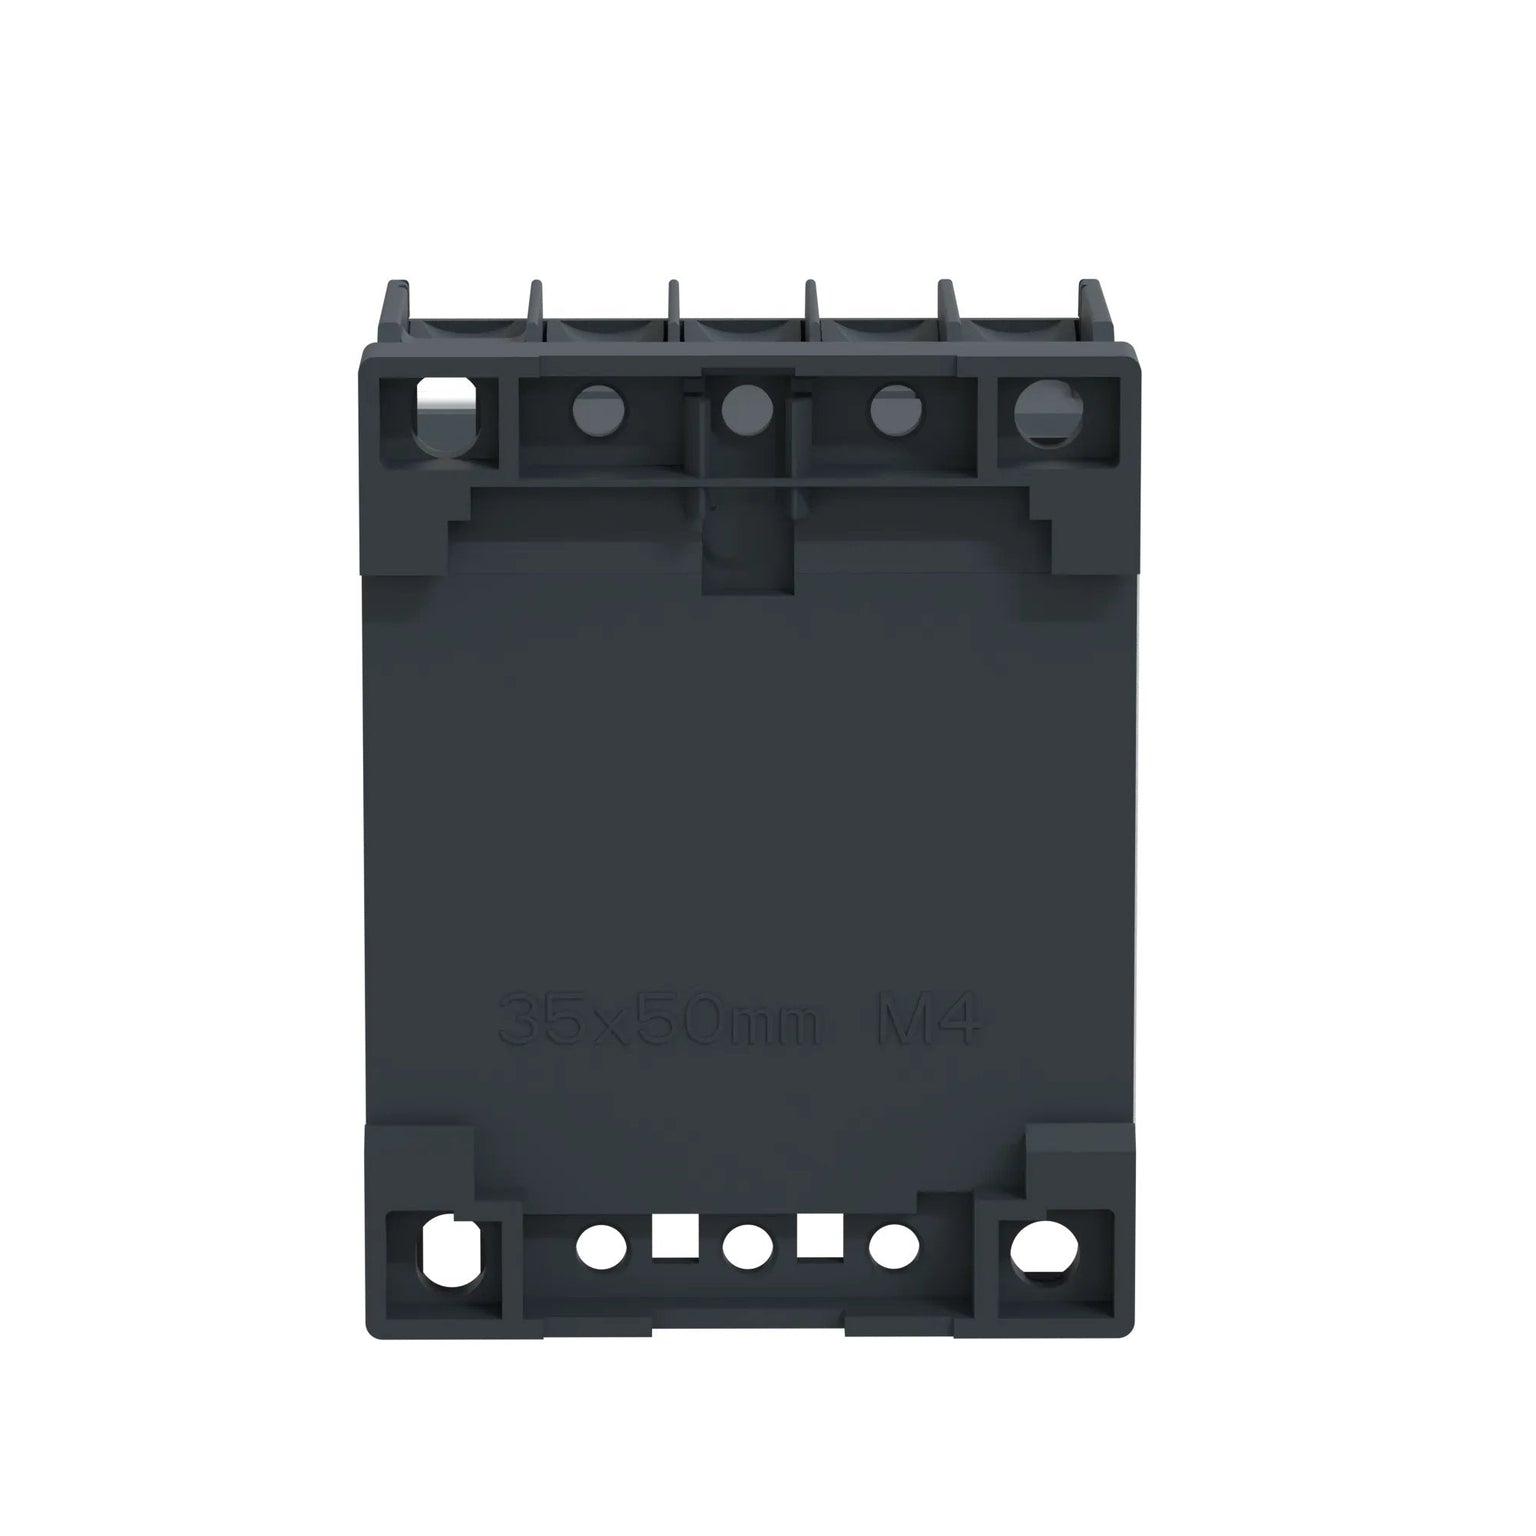 LC1K1210G7 - Square D - Contactor